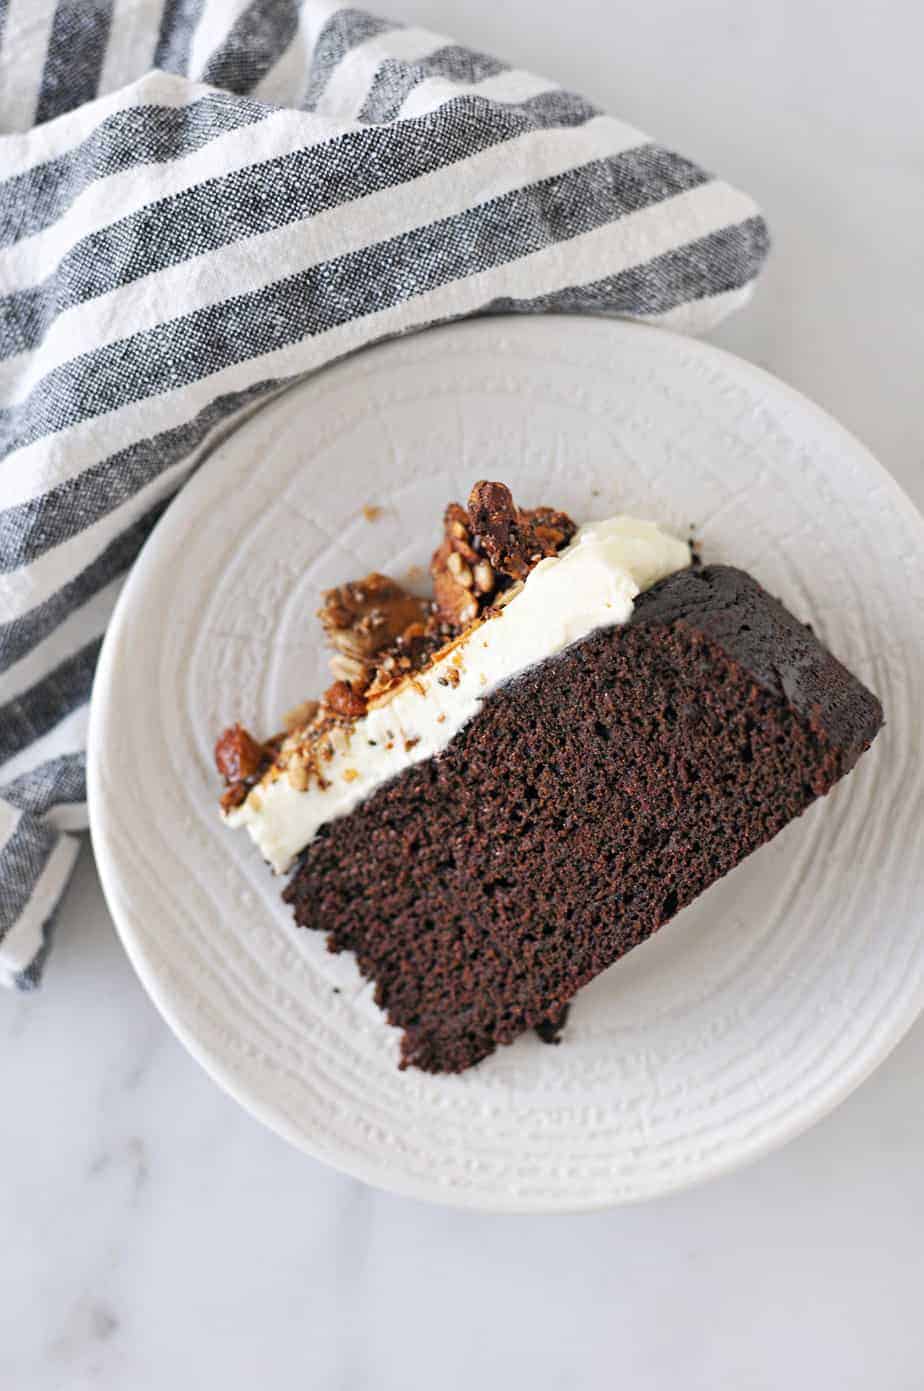 Chocolate Pumpkin Spice Cake with Cream Cheese Frosting recipe (via thepigandquill.com) #glutenfree #baking #fall